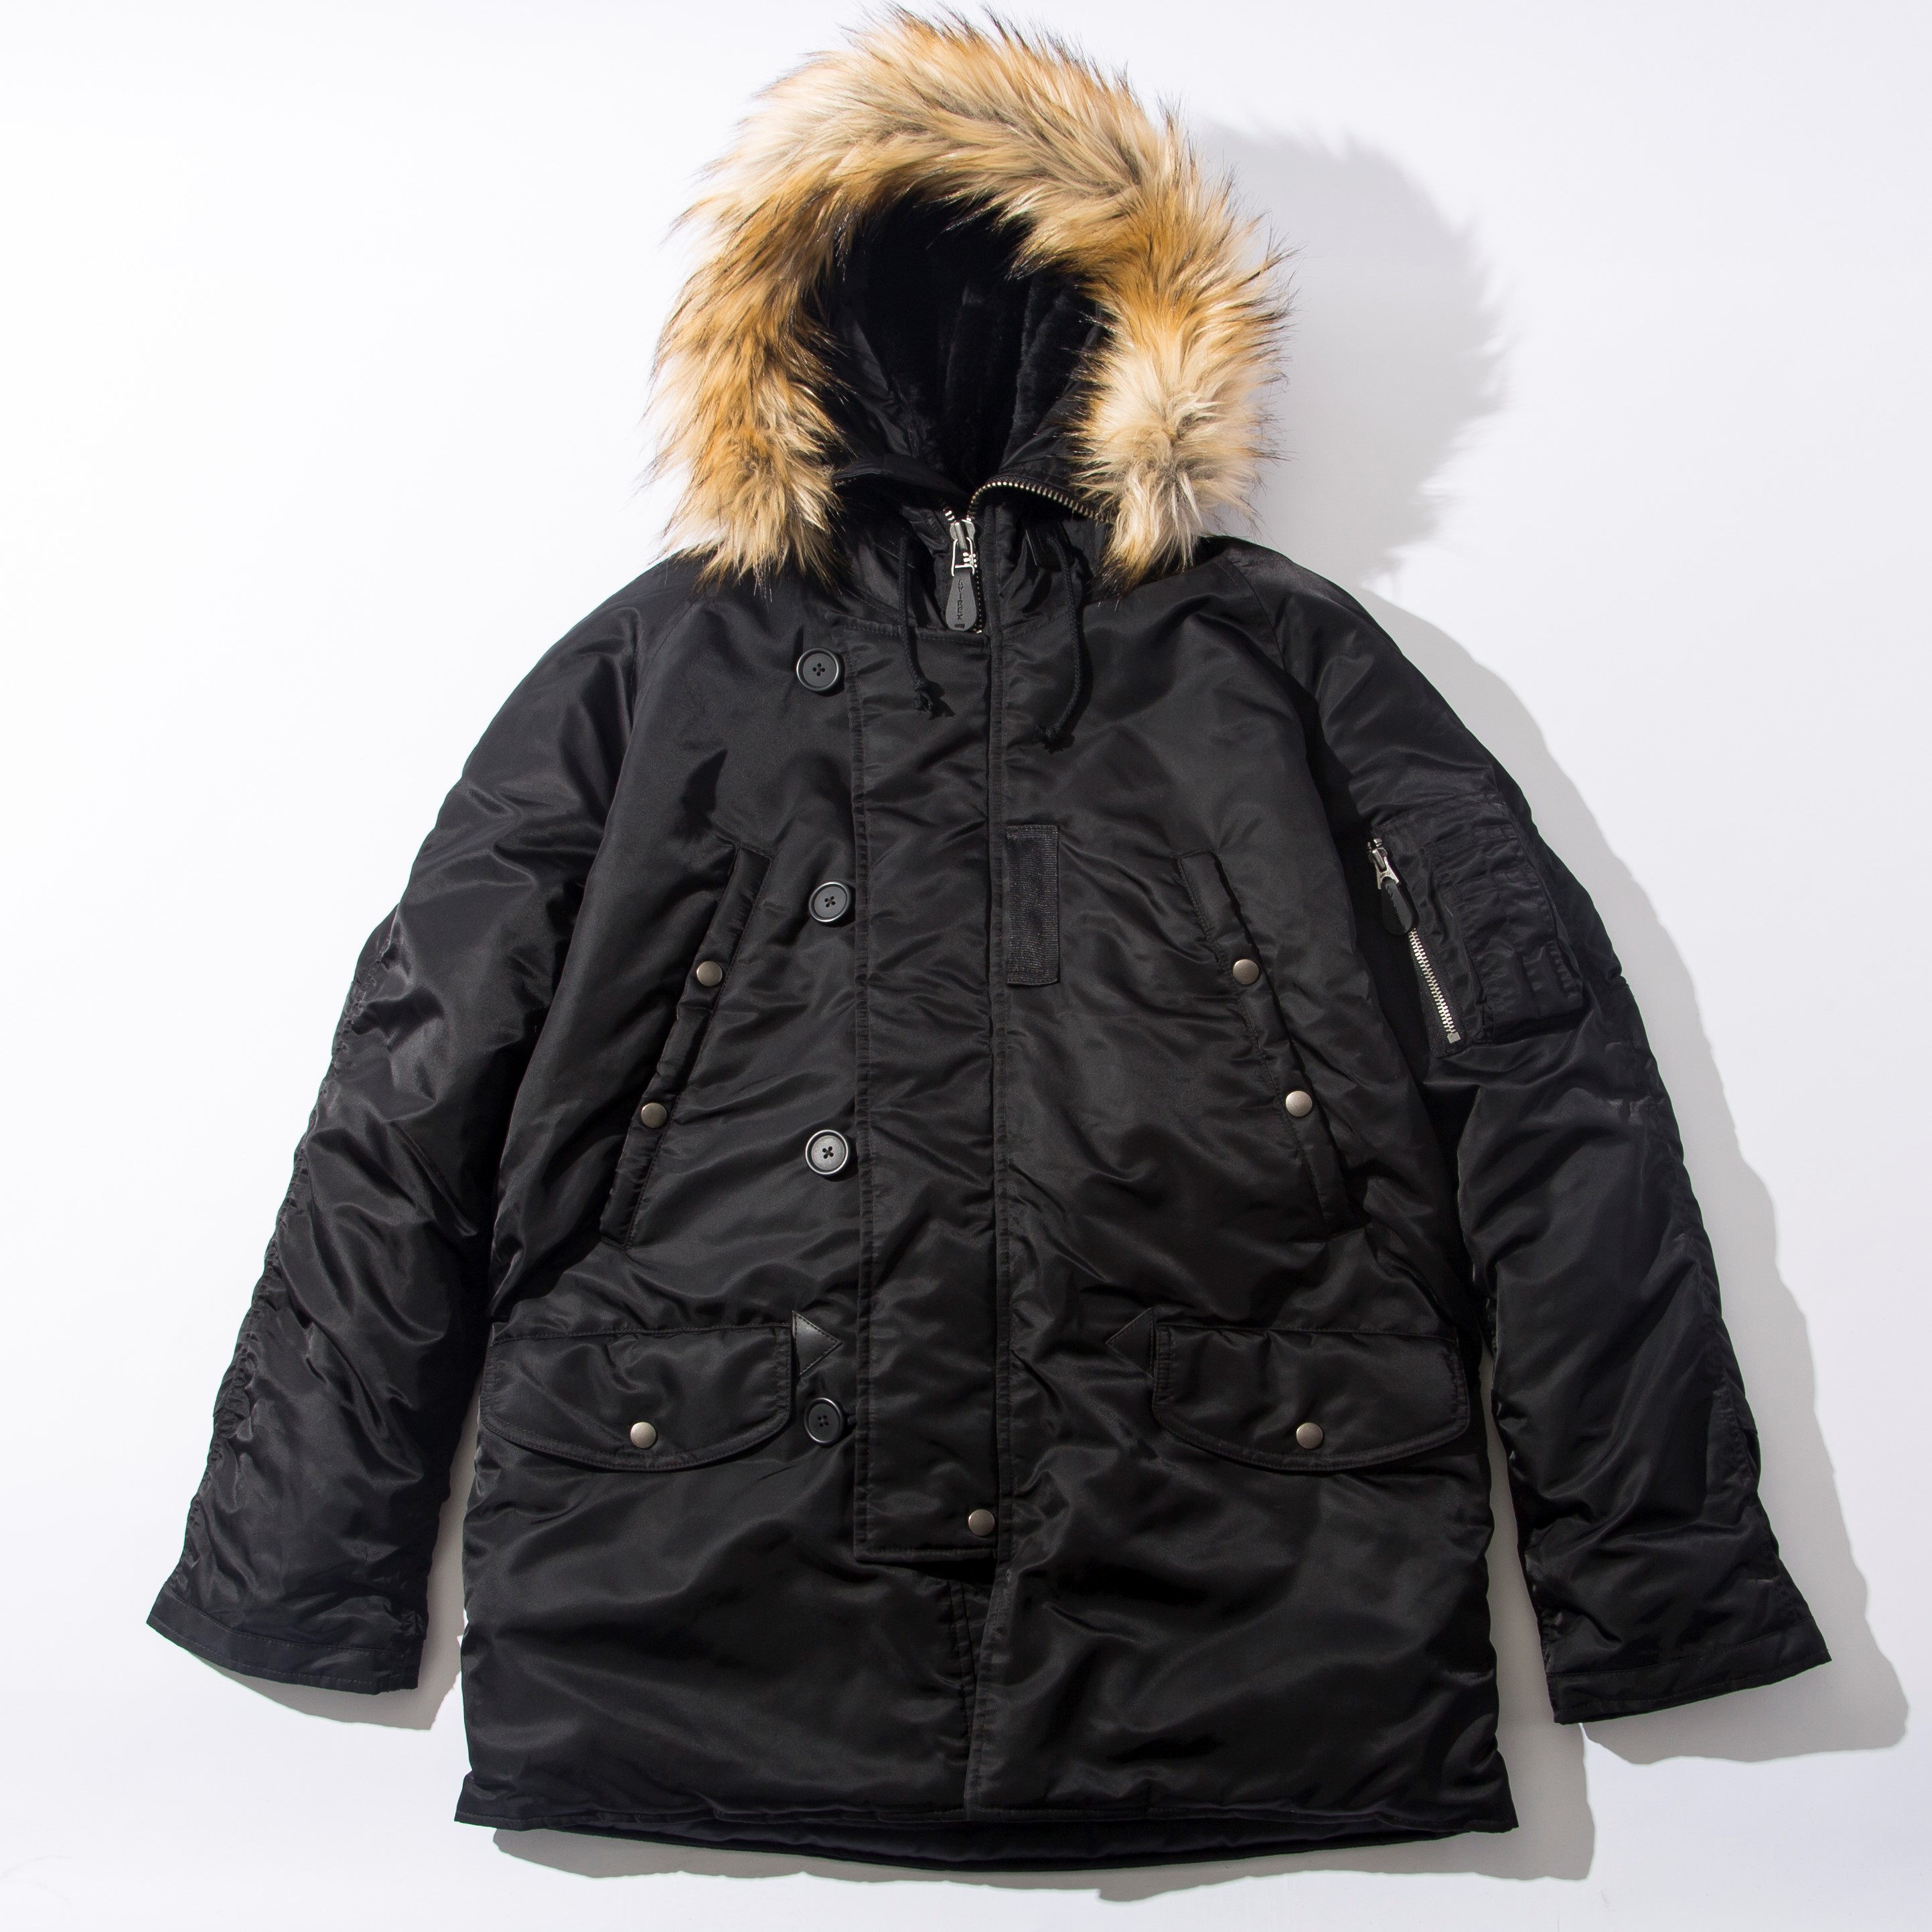 Staff Blog【Subciety別注AVIREX N-3B JACKET】 | Subciety OFFICIAL SITE